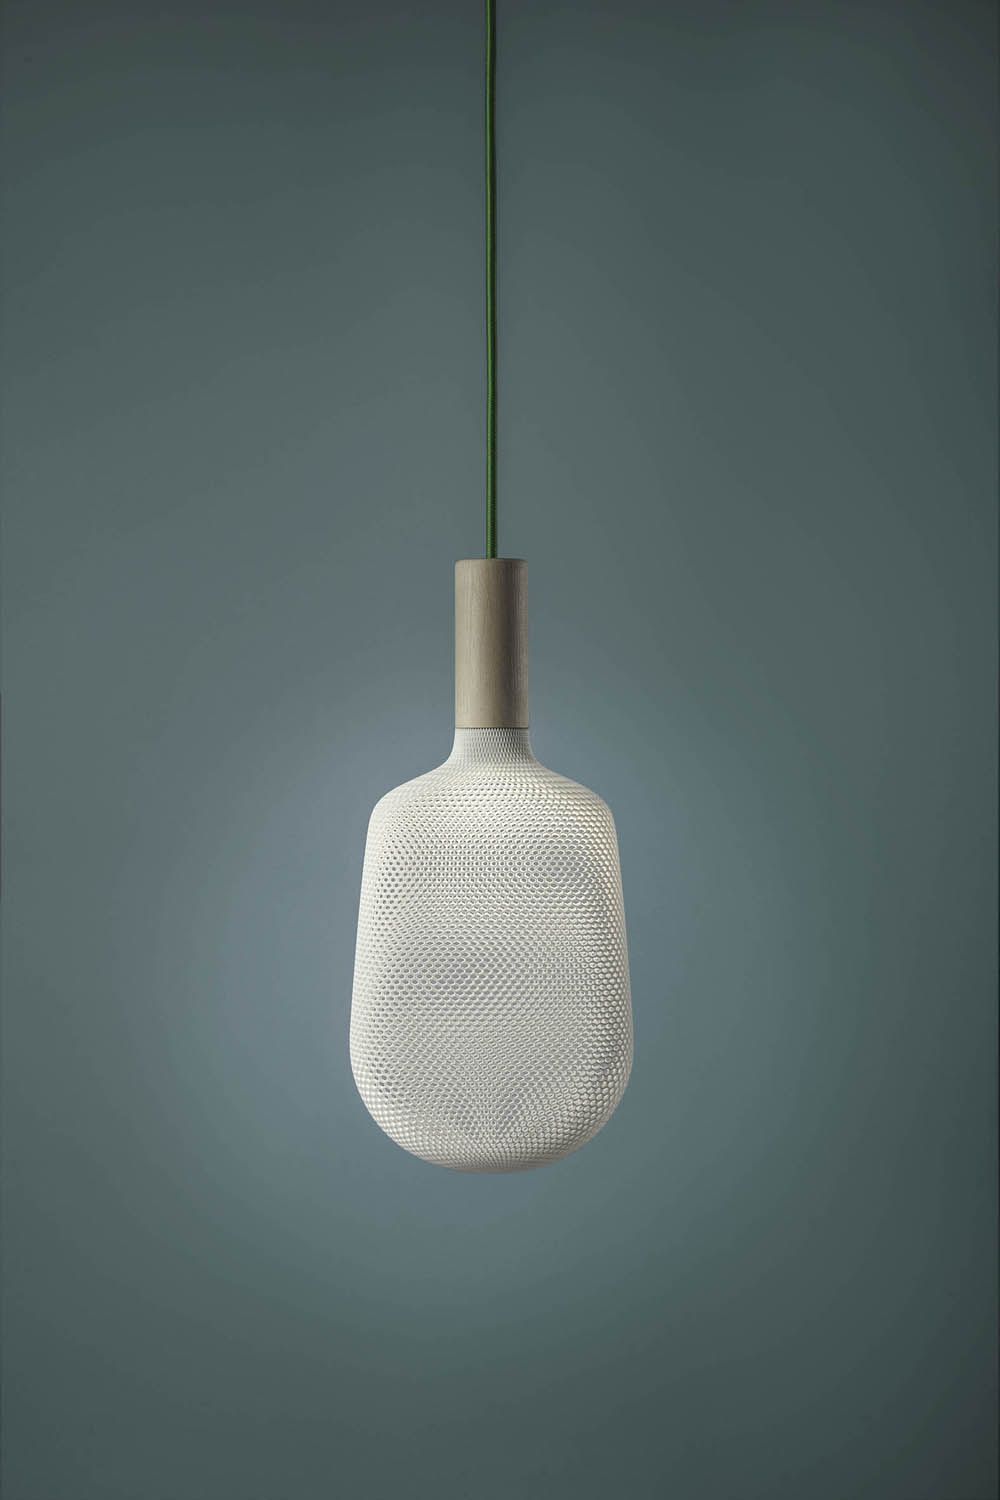 Afillia Lamp Collection Featuring Original 3D Printed Lace-Like Diffusers